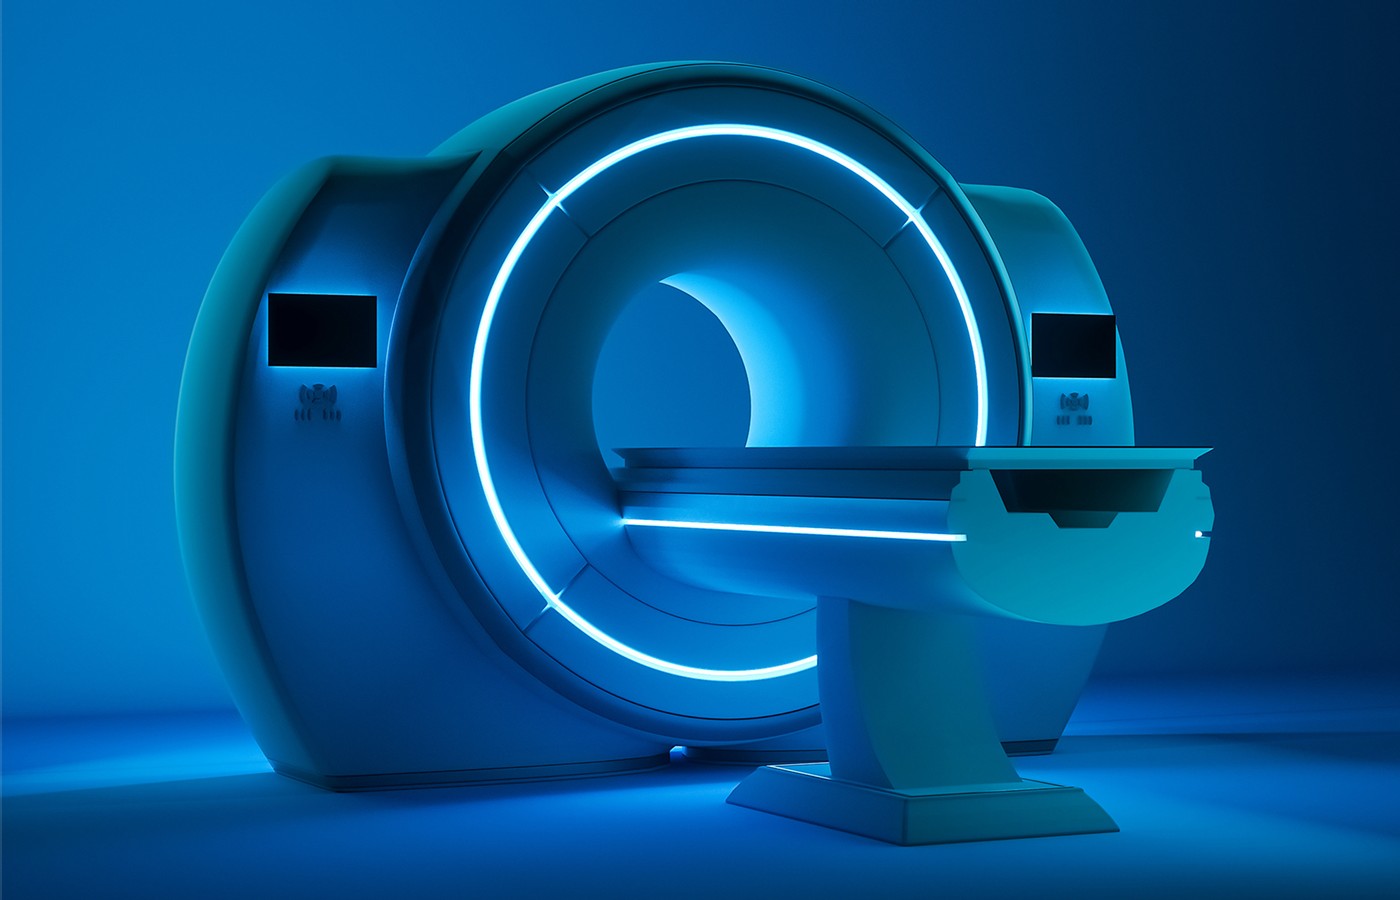 Have You Ever Ordered an MRI?